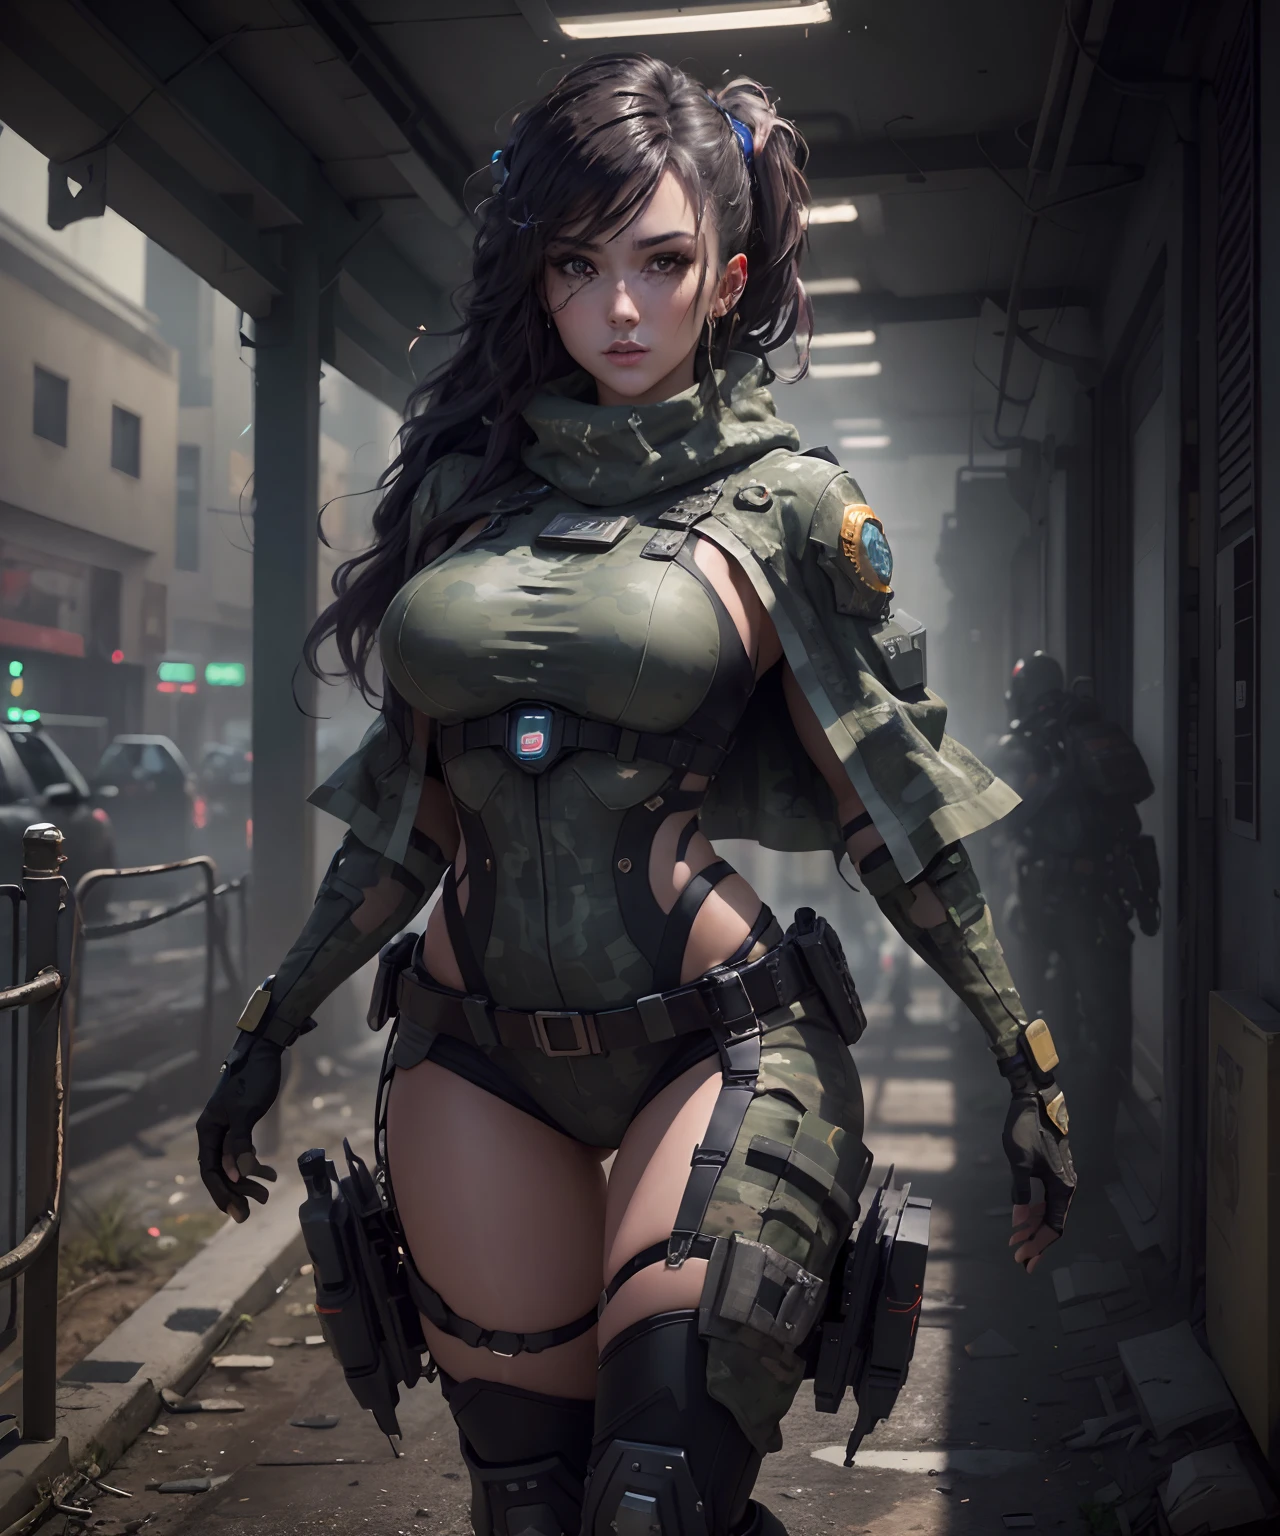 ((Best quality)), ((masterpiece)), (highly detailed:1.3), 3D, beautiful (cyberpunk:1.2) special forces, robort,female with thick voluminous hair wearing (wearing camouflage_uniform:1.1), body armour,cape,digital (camouflage:1.3),HDR (High Dynamic Range),Ray Tracing,NVIDIA RTX,Super-Resolution,Unreal 5,Subsurface scattering,PBR Texturing,Post-processing,Anisotropic Filtering,Depth-of-field,Maximum clarity and sharpness,Multi-layered textures,Albedo and Specular maps,Surface shading,Accurate simulation of light-material interaction,Perfect proportions,Octane Render,Two-tone lighting,Wide aperture,Low ISO,White balance,Rule of thirds,8K RAW,Efficient Sub-Pixel,sub-pixel convolution,